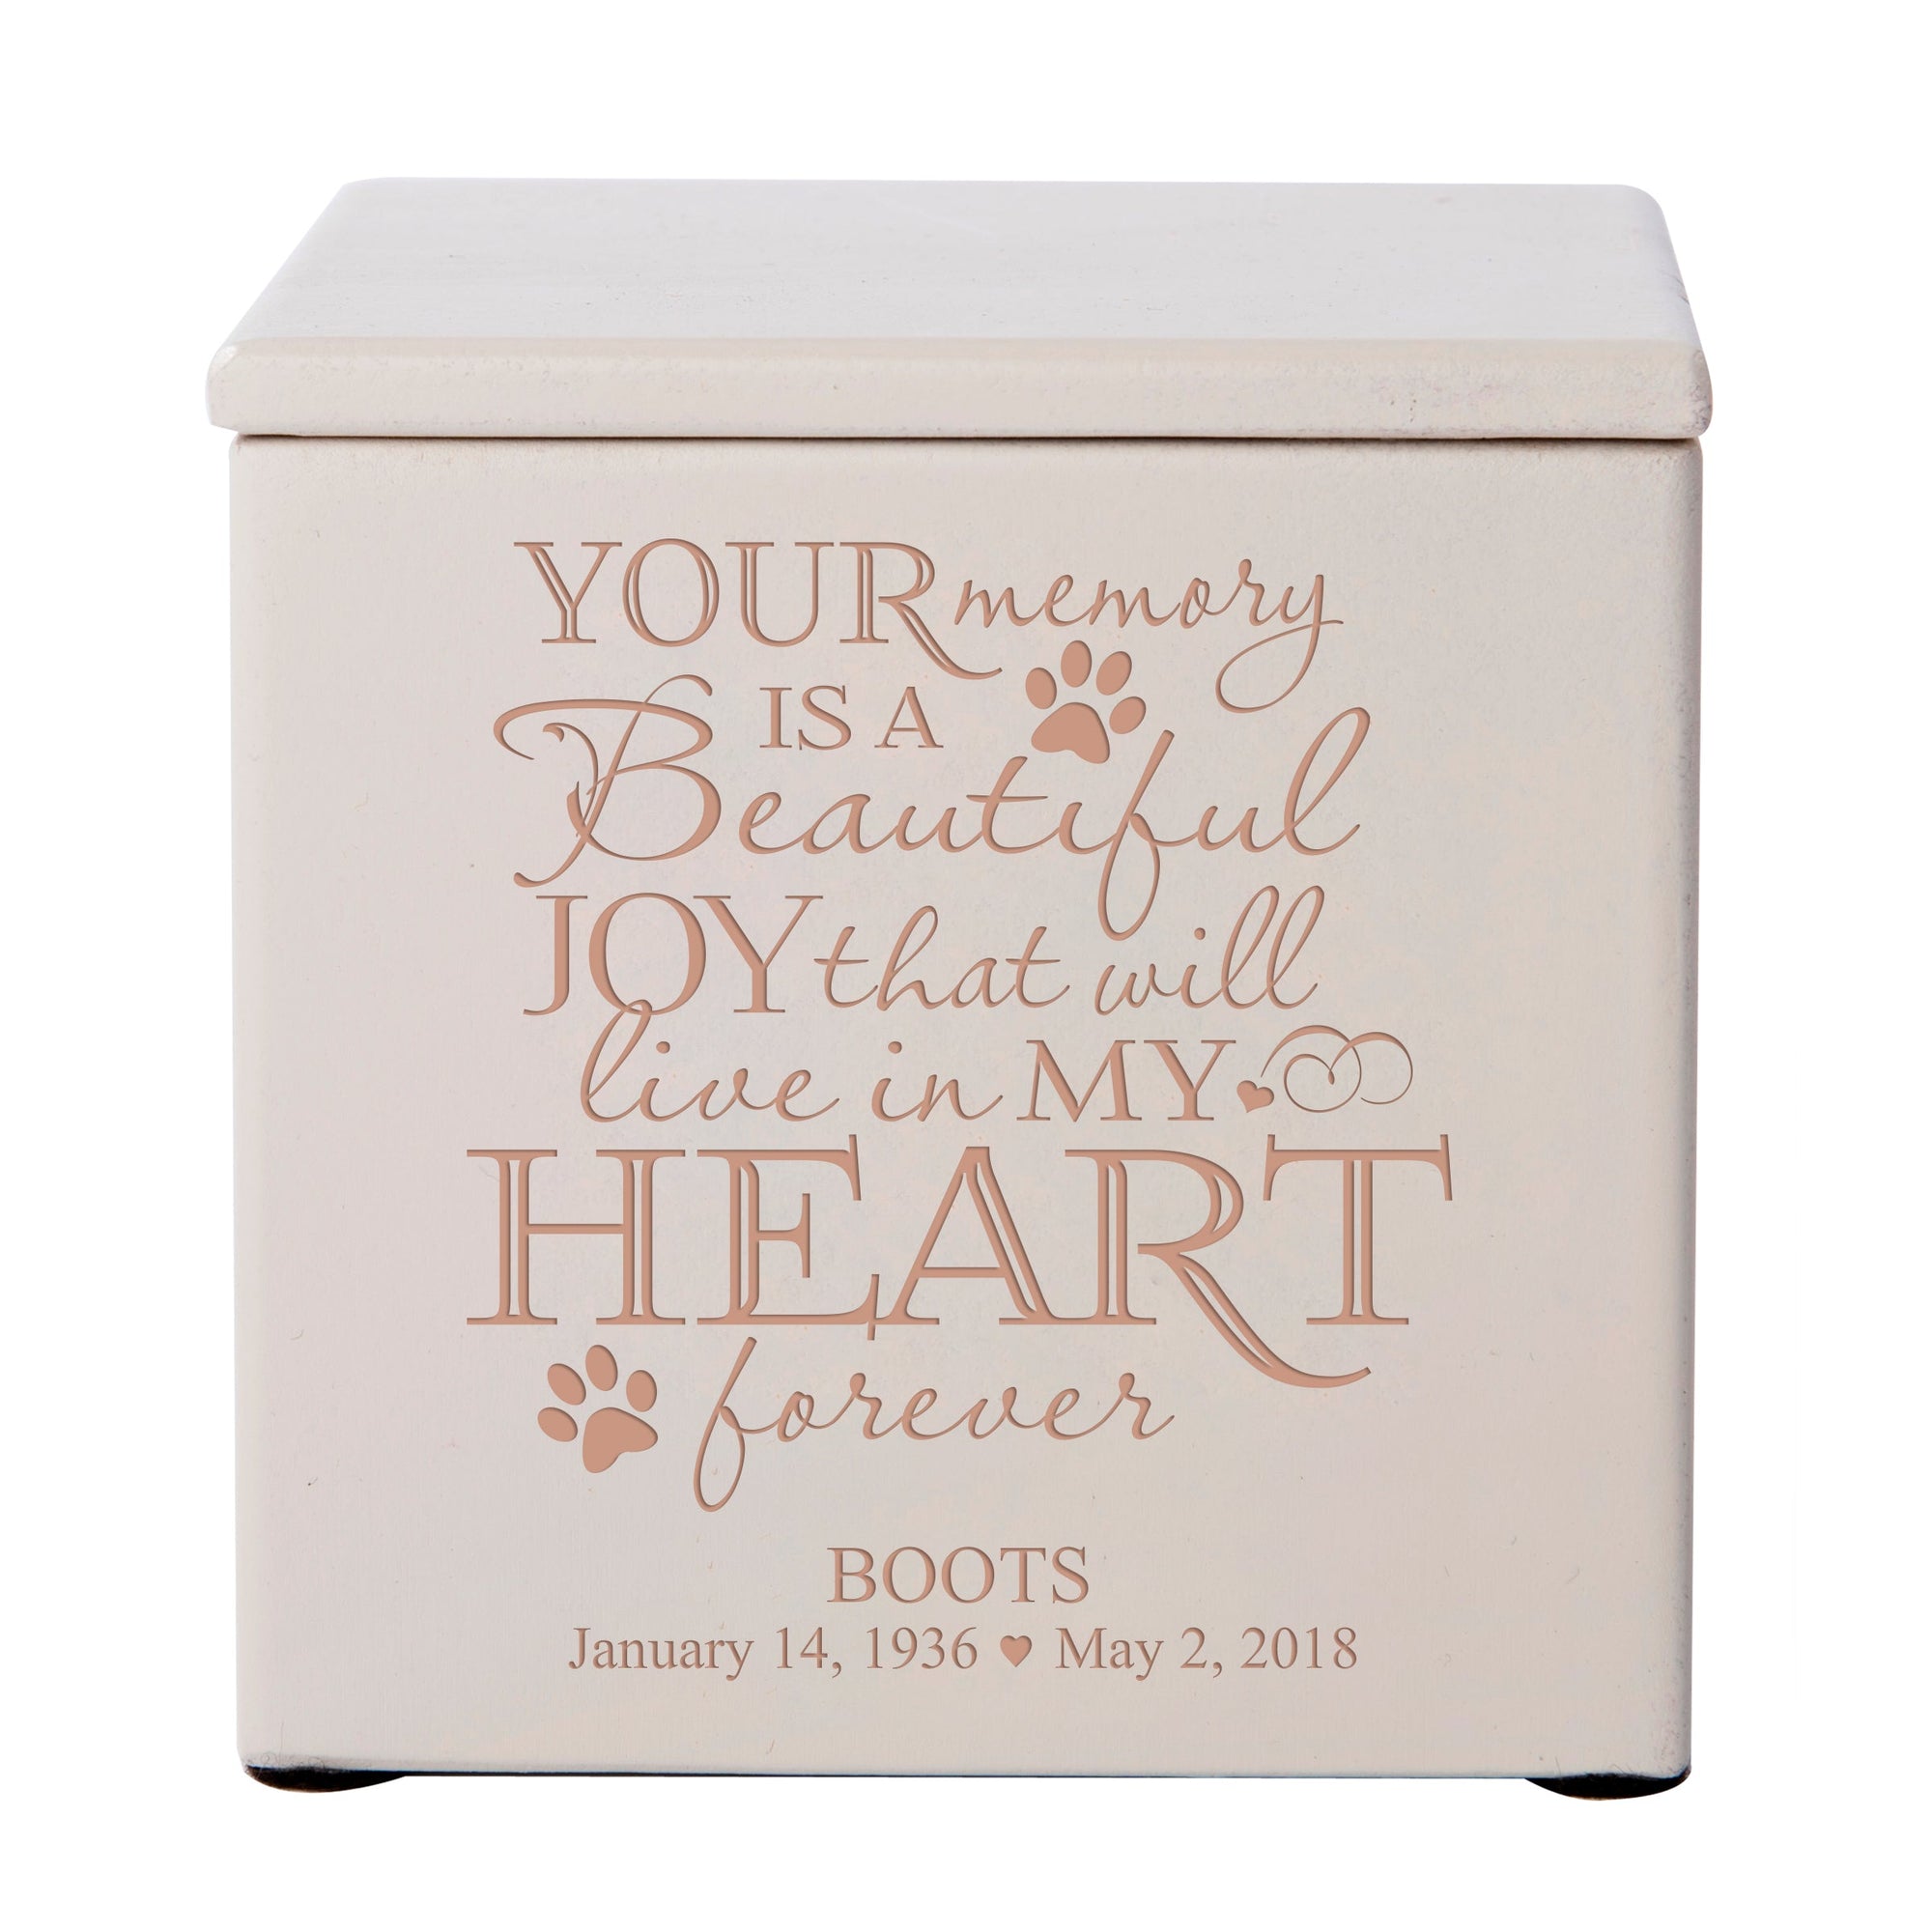 Pet Memorial Keepsake Cremation Urn Box for Dog or Cat - Your Memory Is A Beautiful Joy